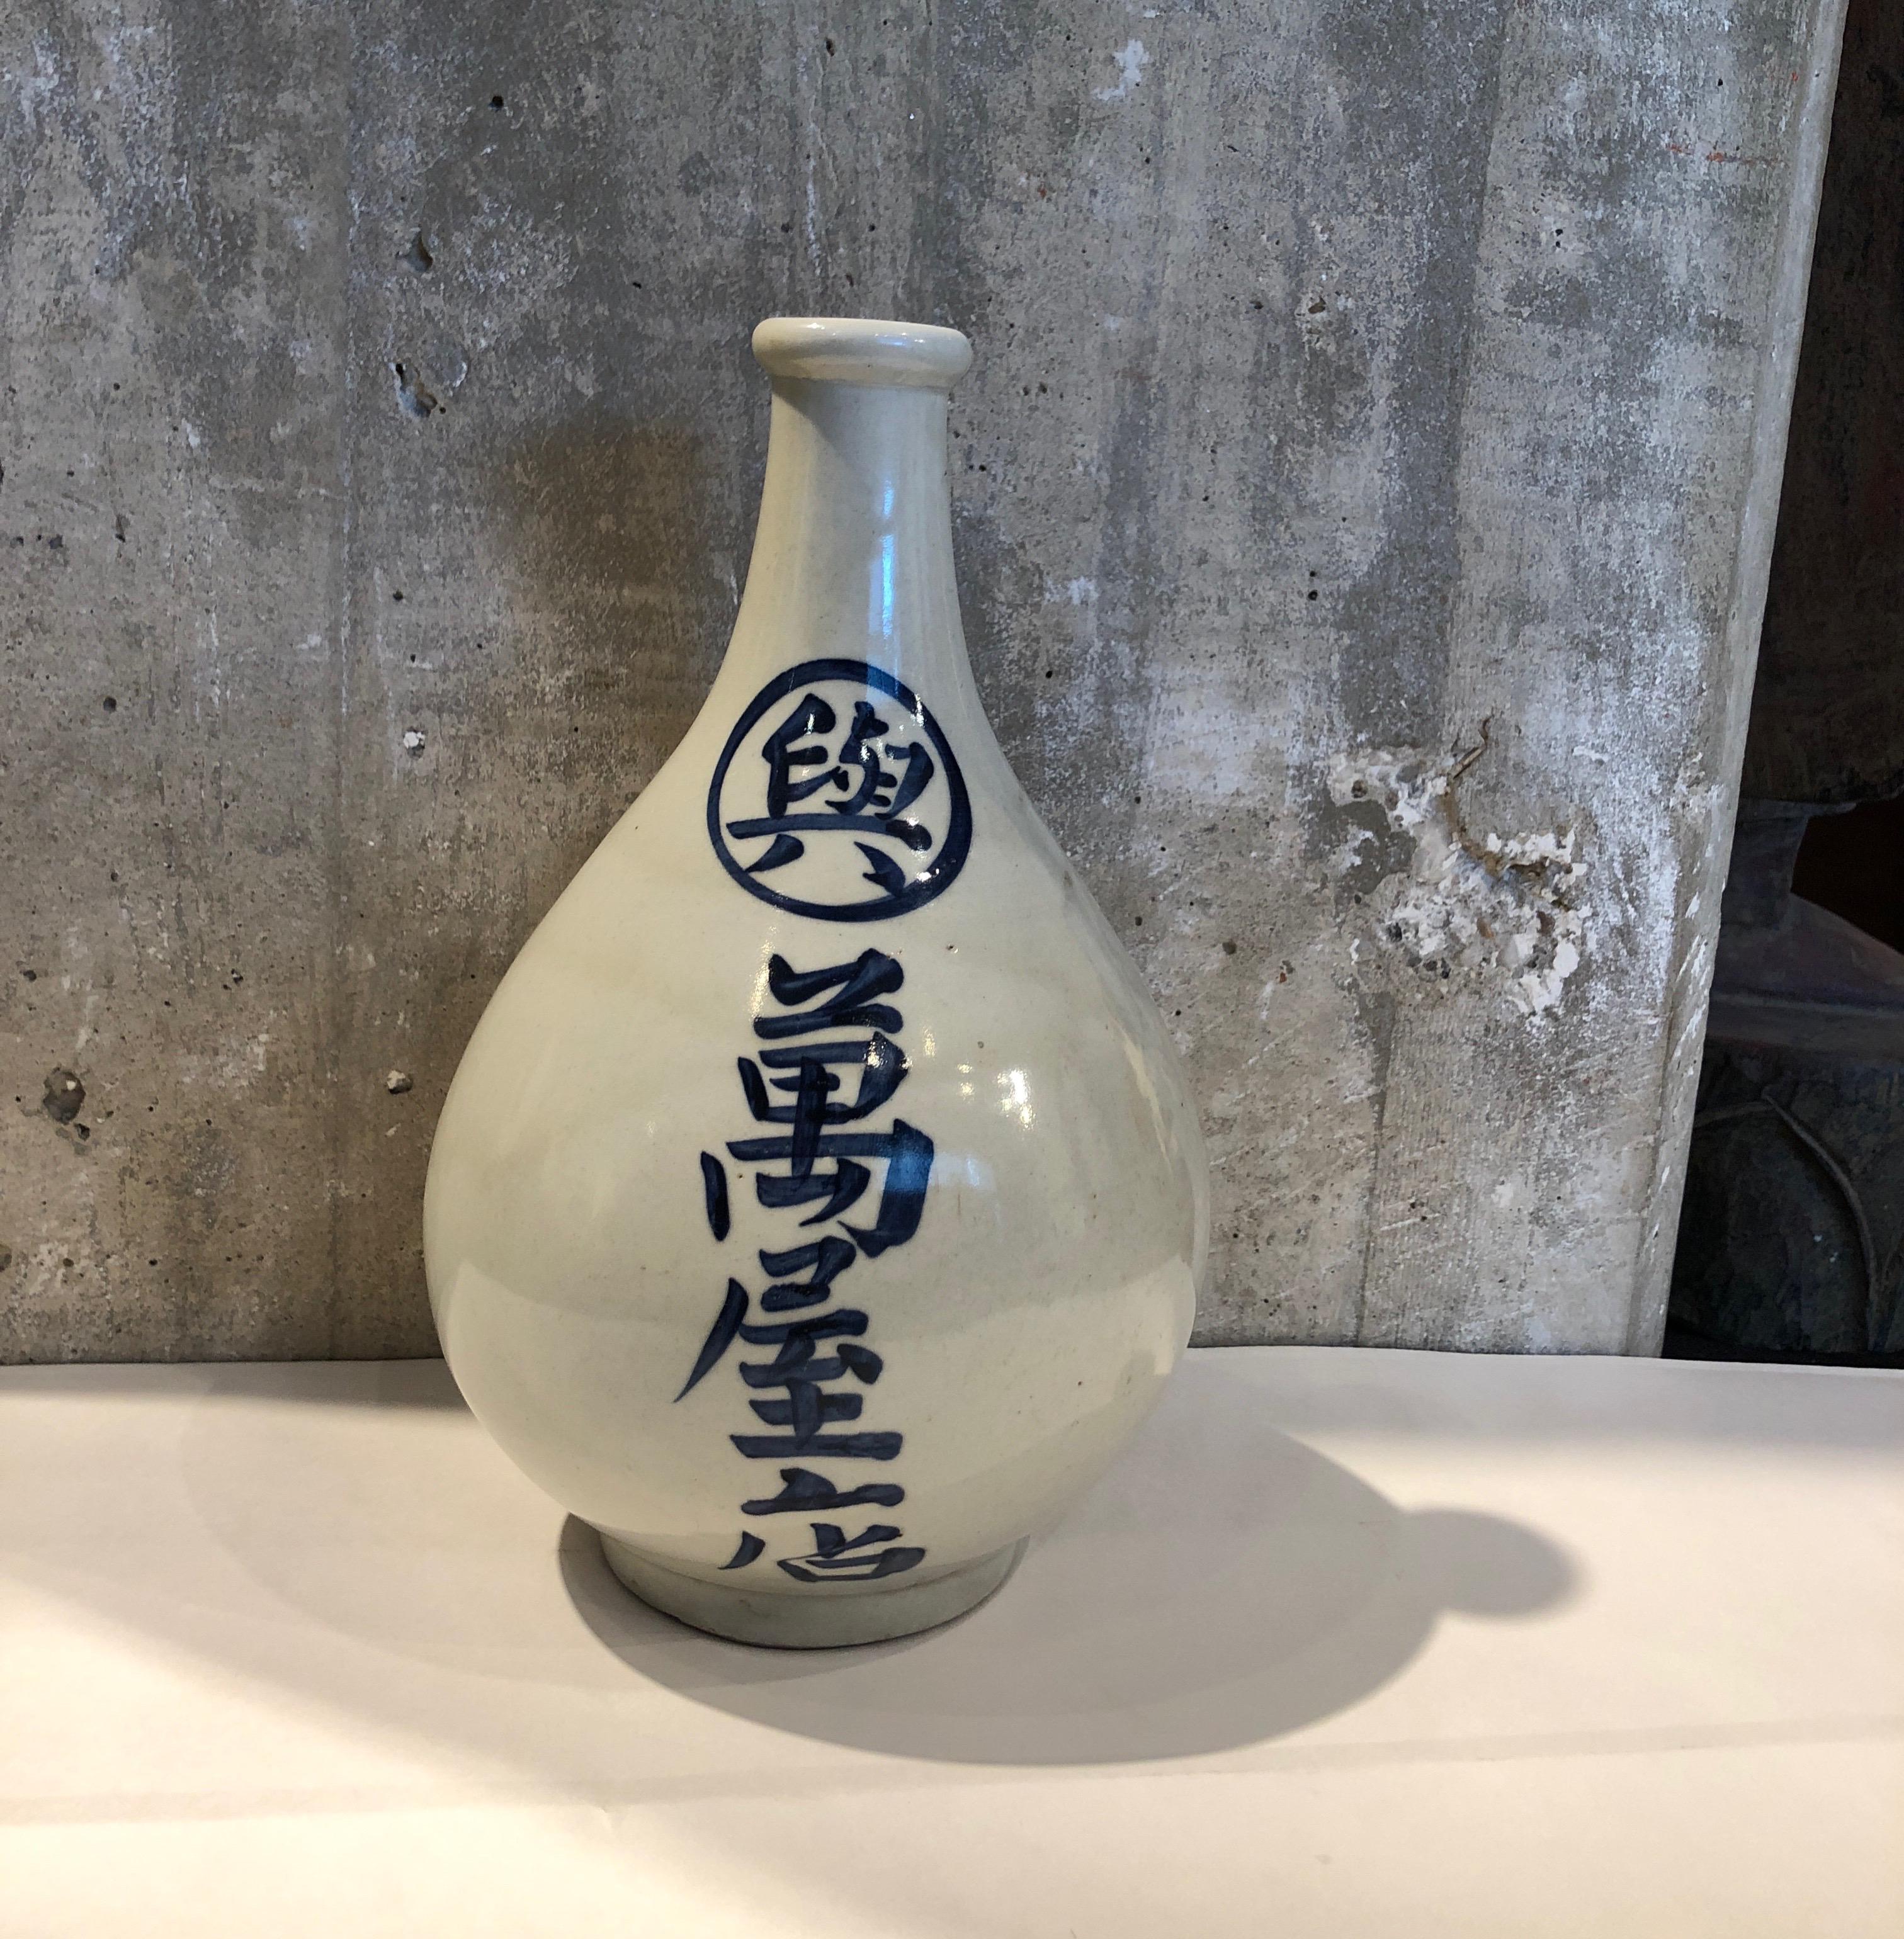 Vintage Japanese Sake Bottle with Hand Painted Calligraphy 7